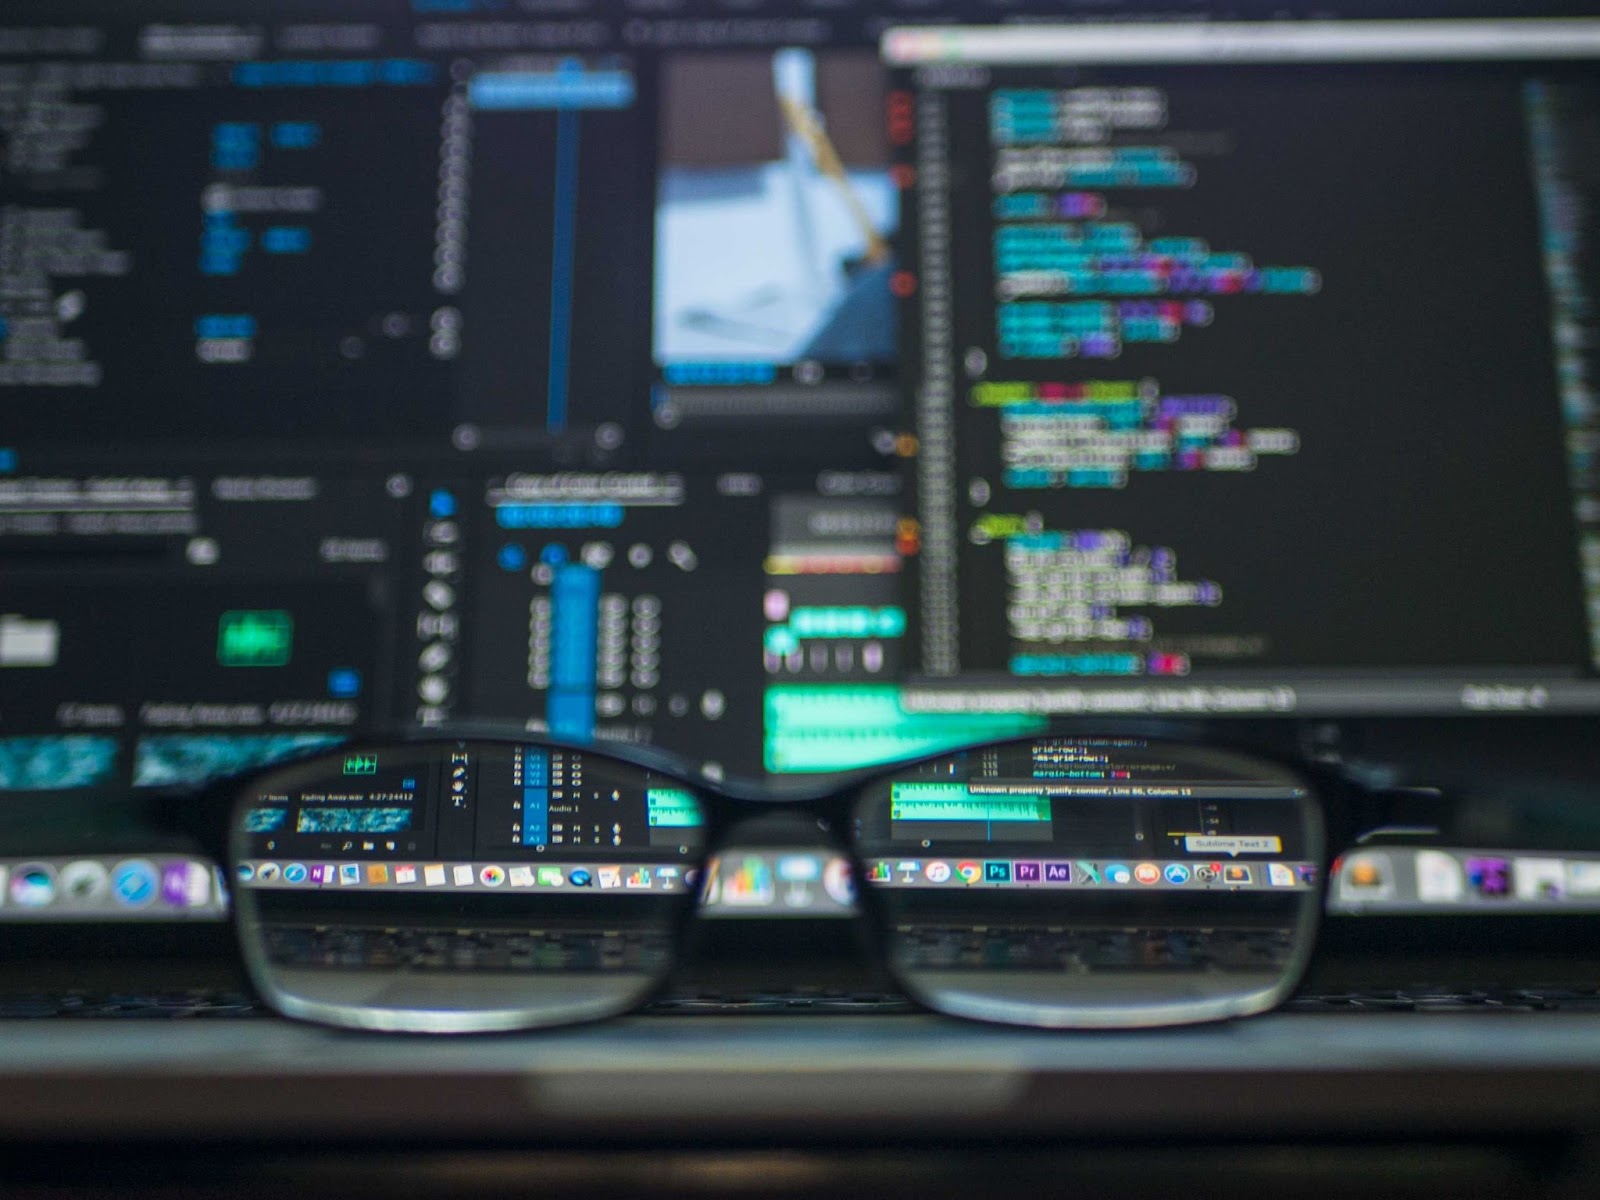 Image of blurred computer screen with focus only shown through a pair of glasses placed on the desk